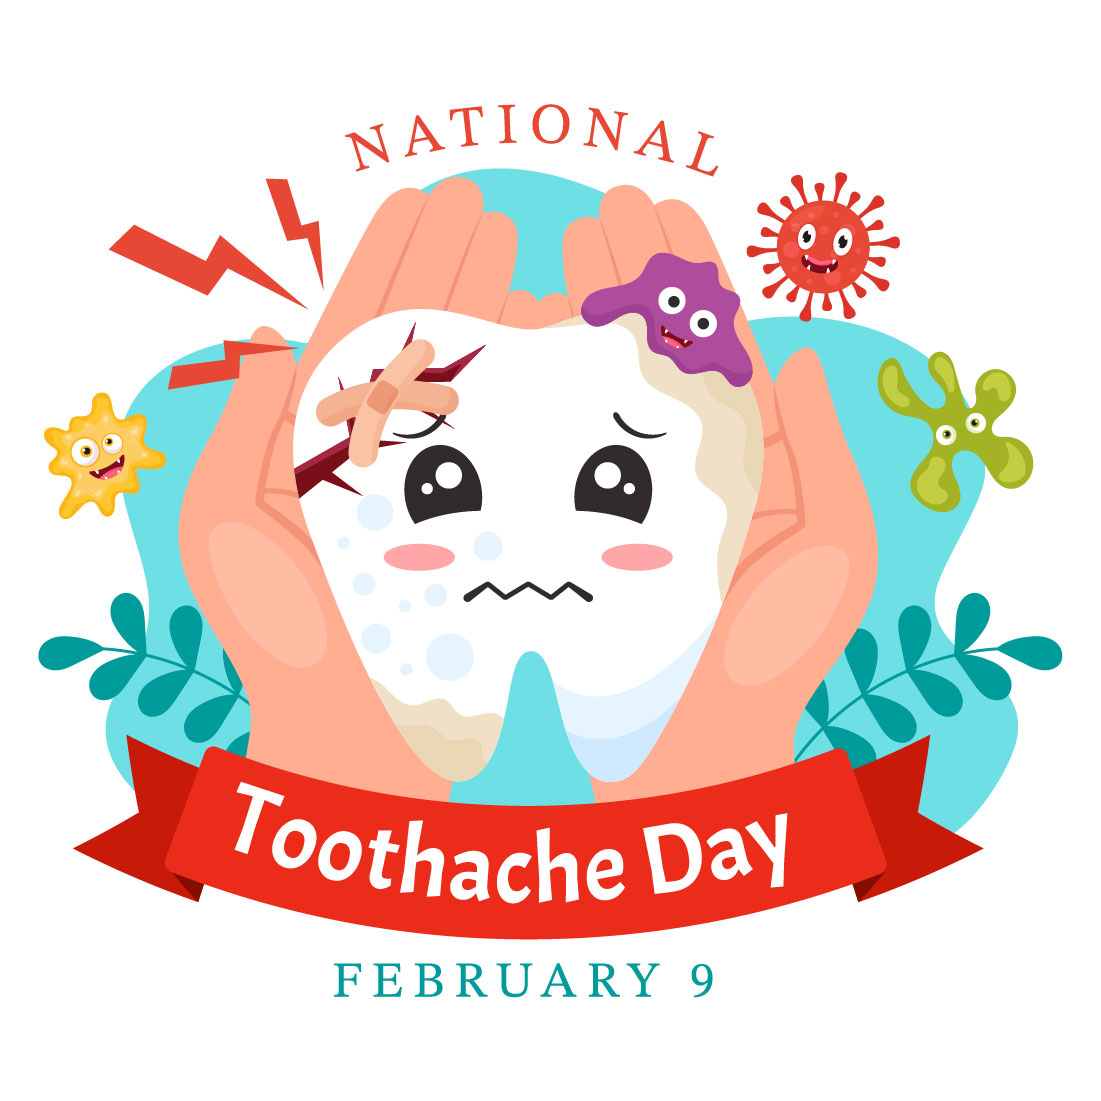 12 National Toothache Day Illustration cover image.